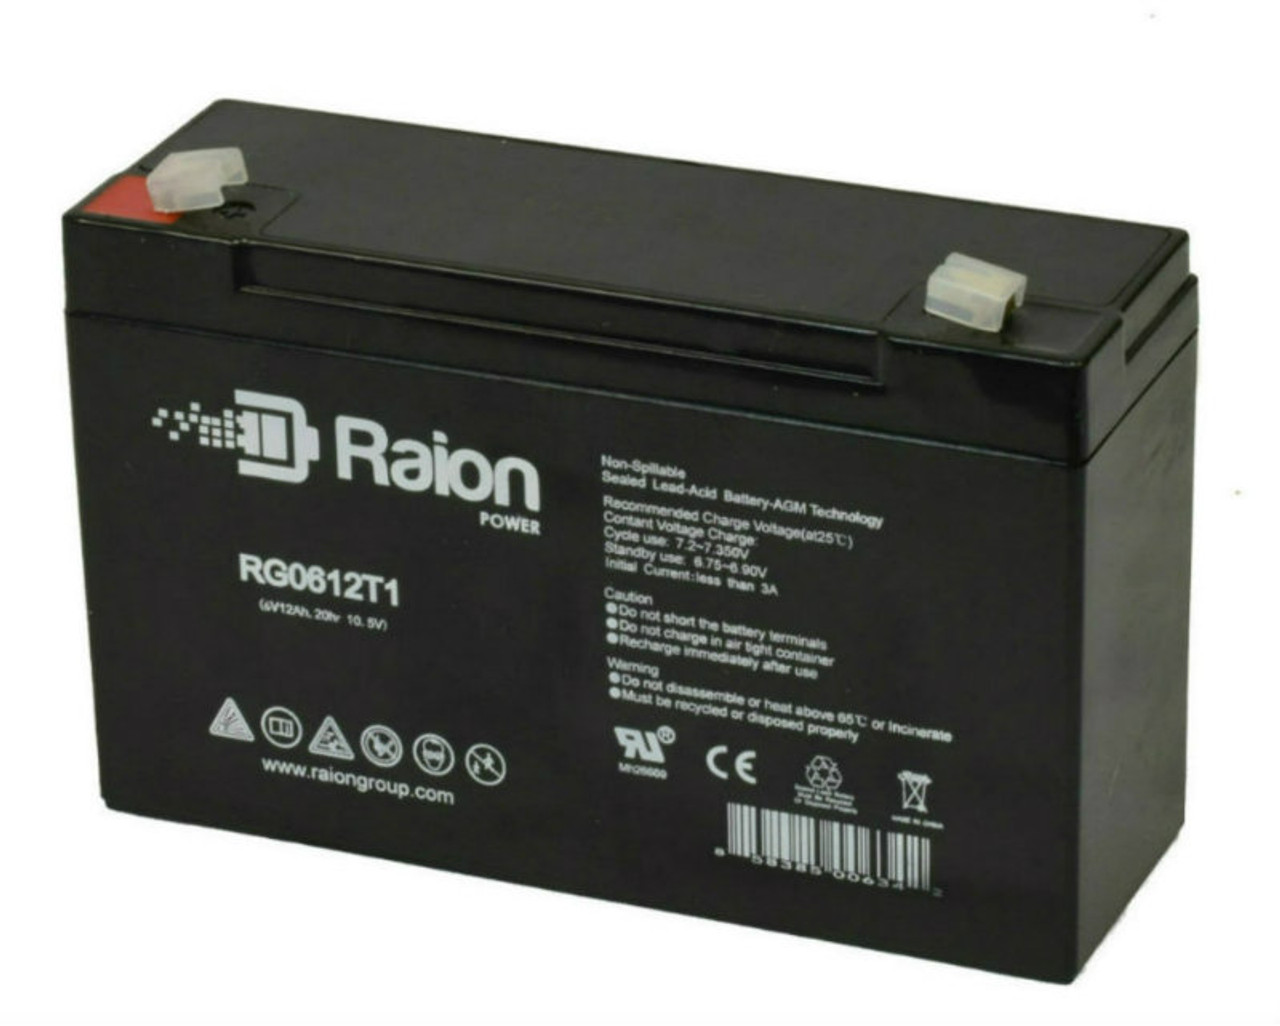 Raion Power RG06120T1 Replacement Battery for ELPower EP6100